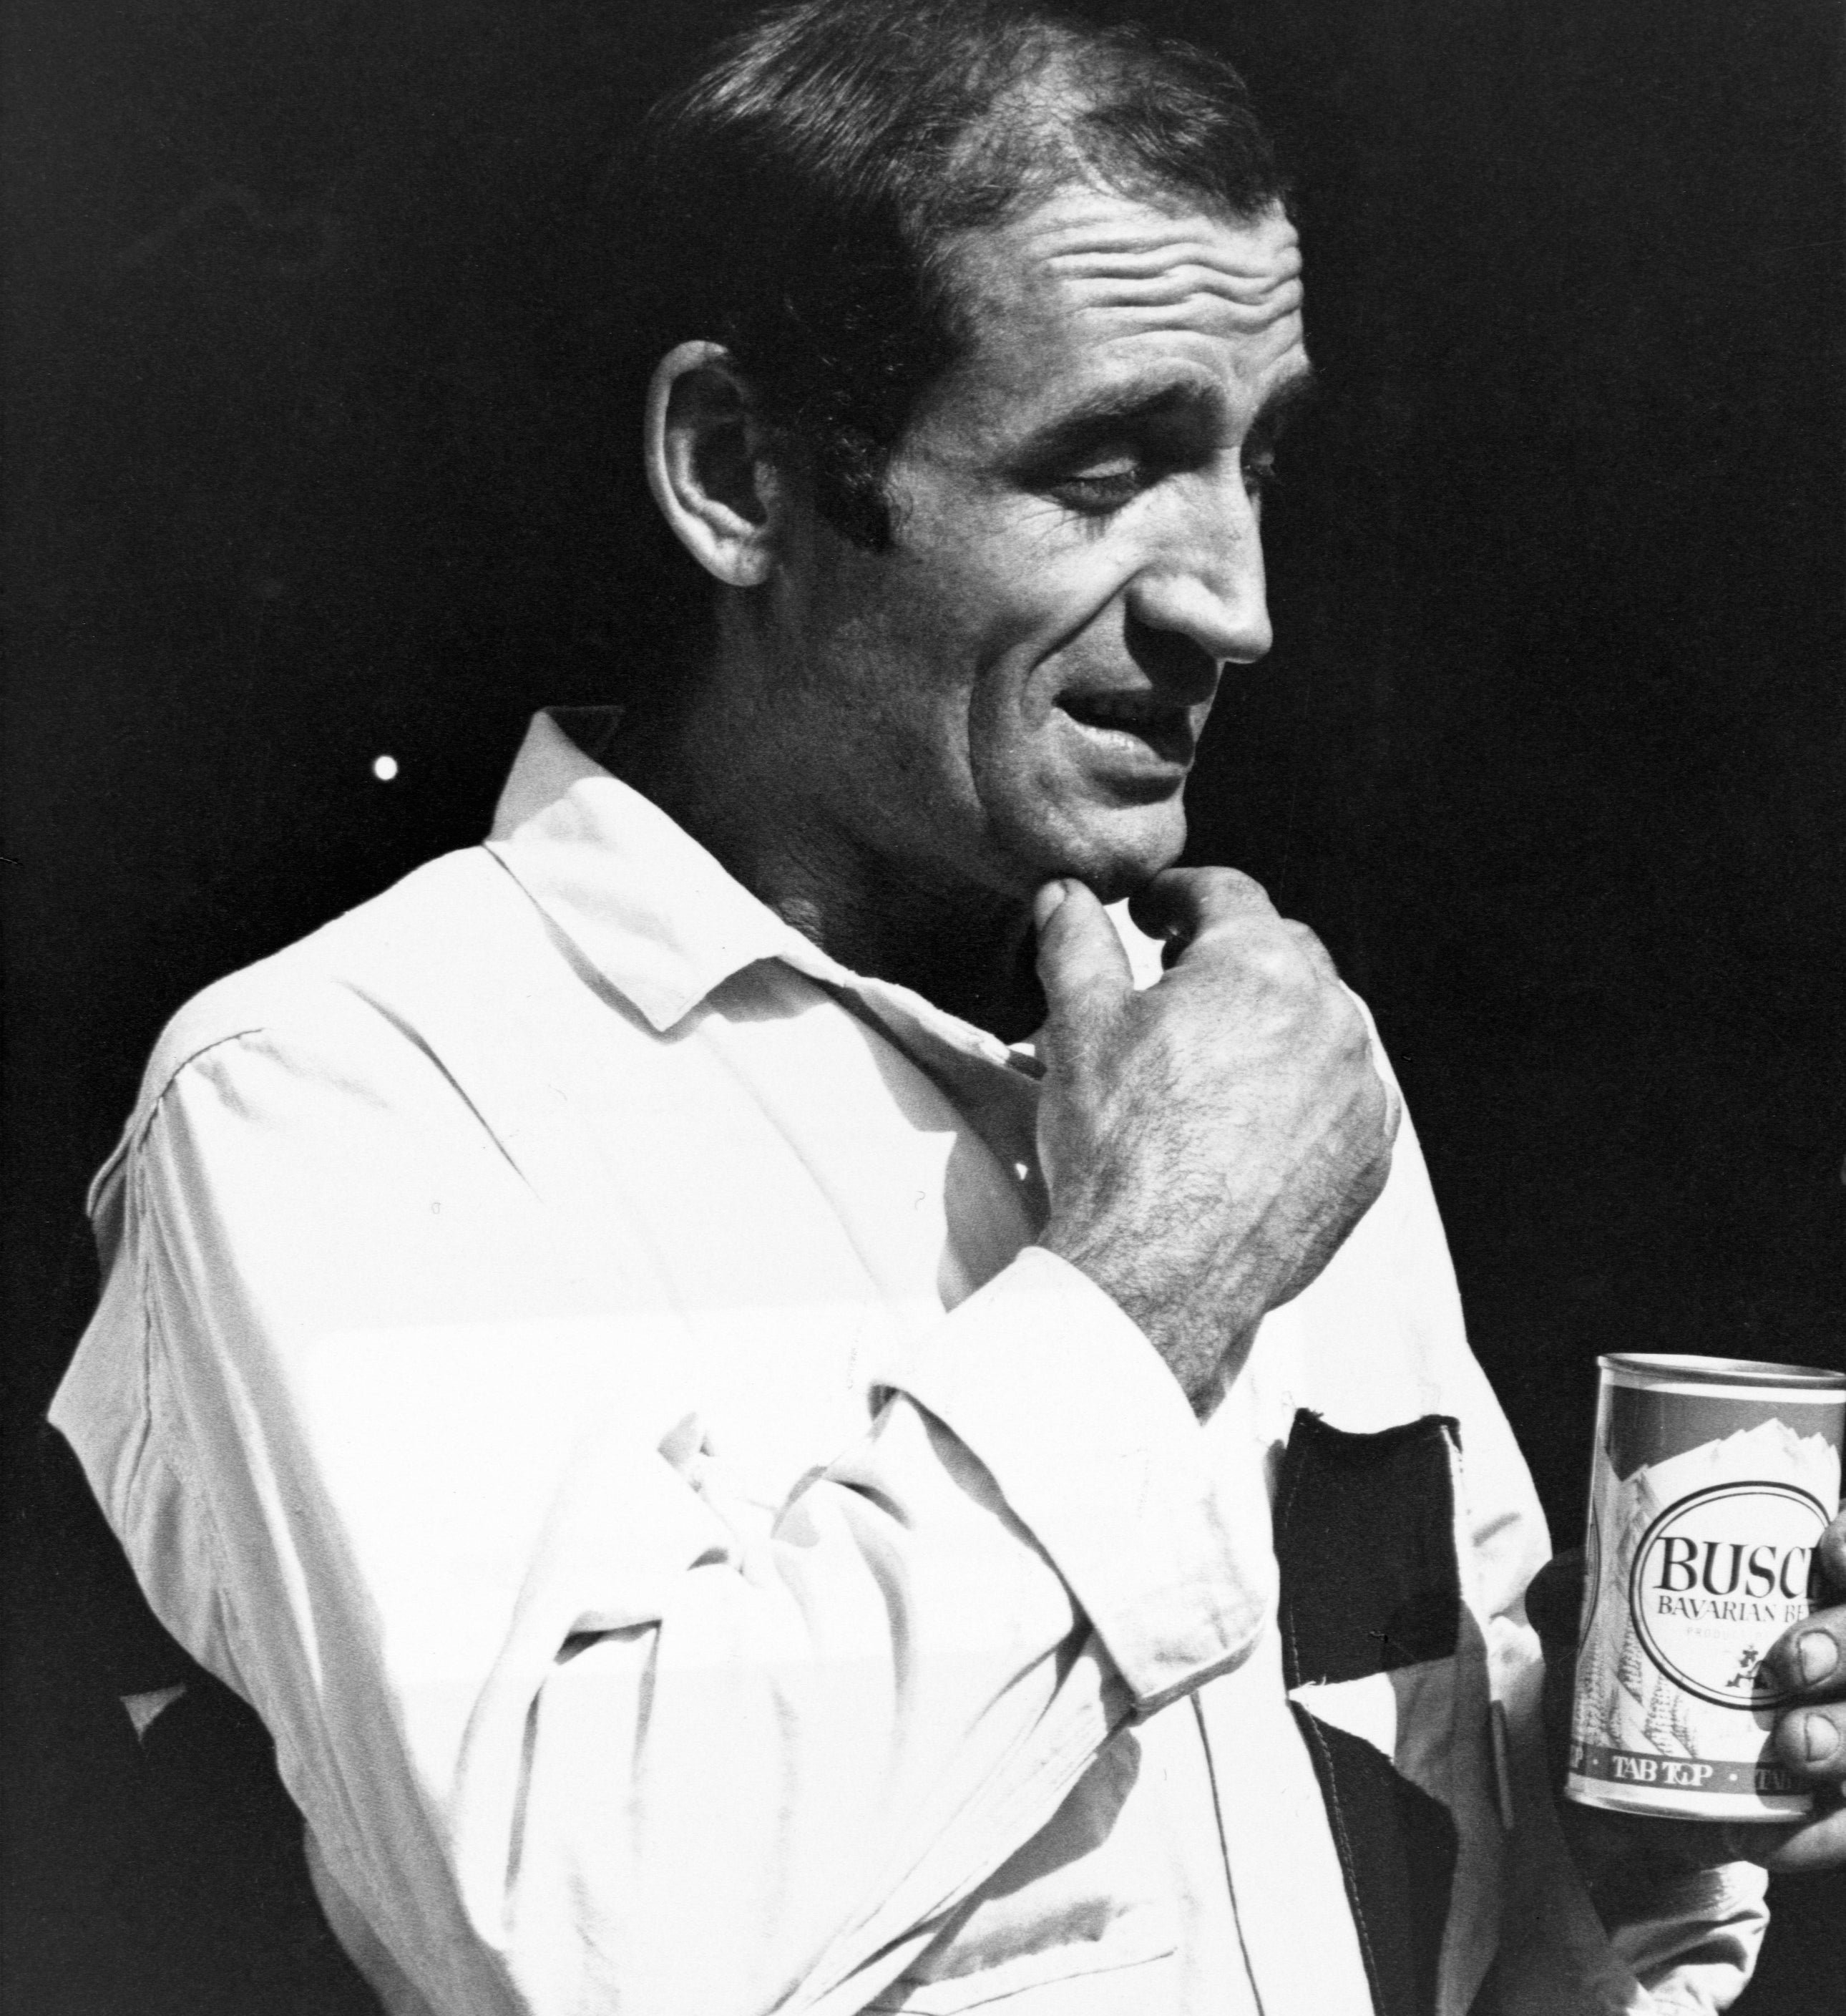 Jack Karouac, author of The Dharma Bums, holding a can of Busch beer